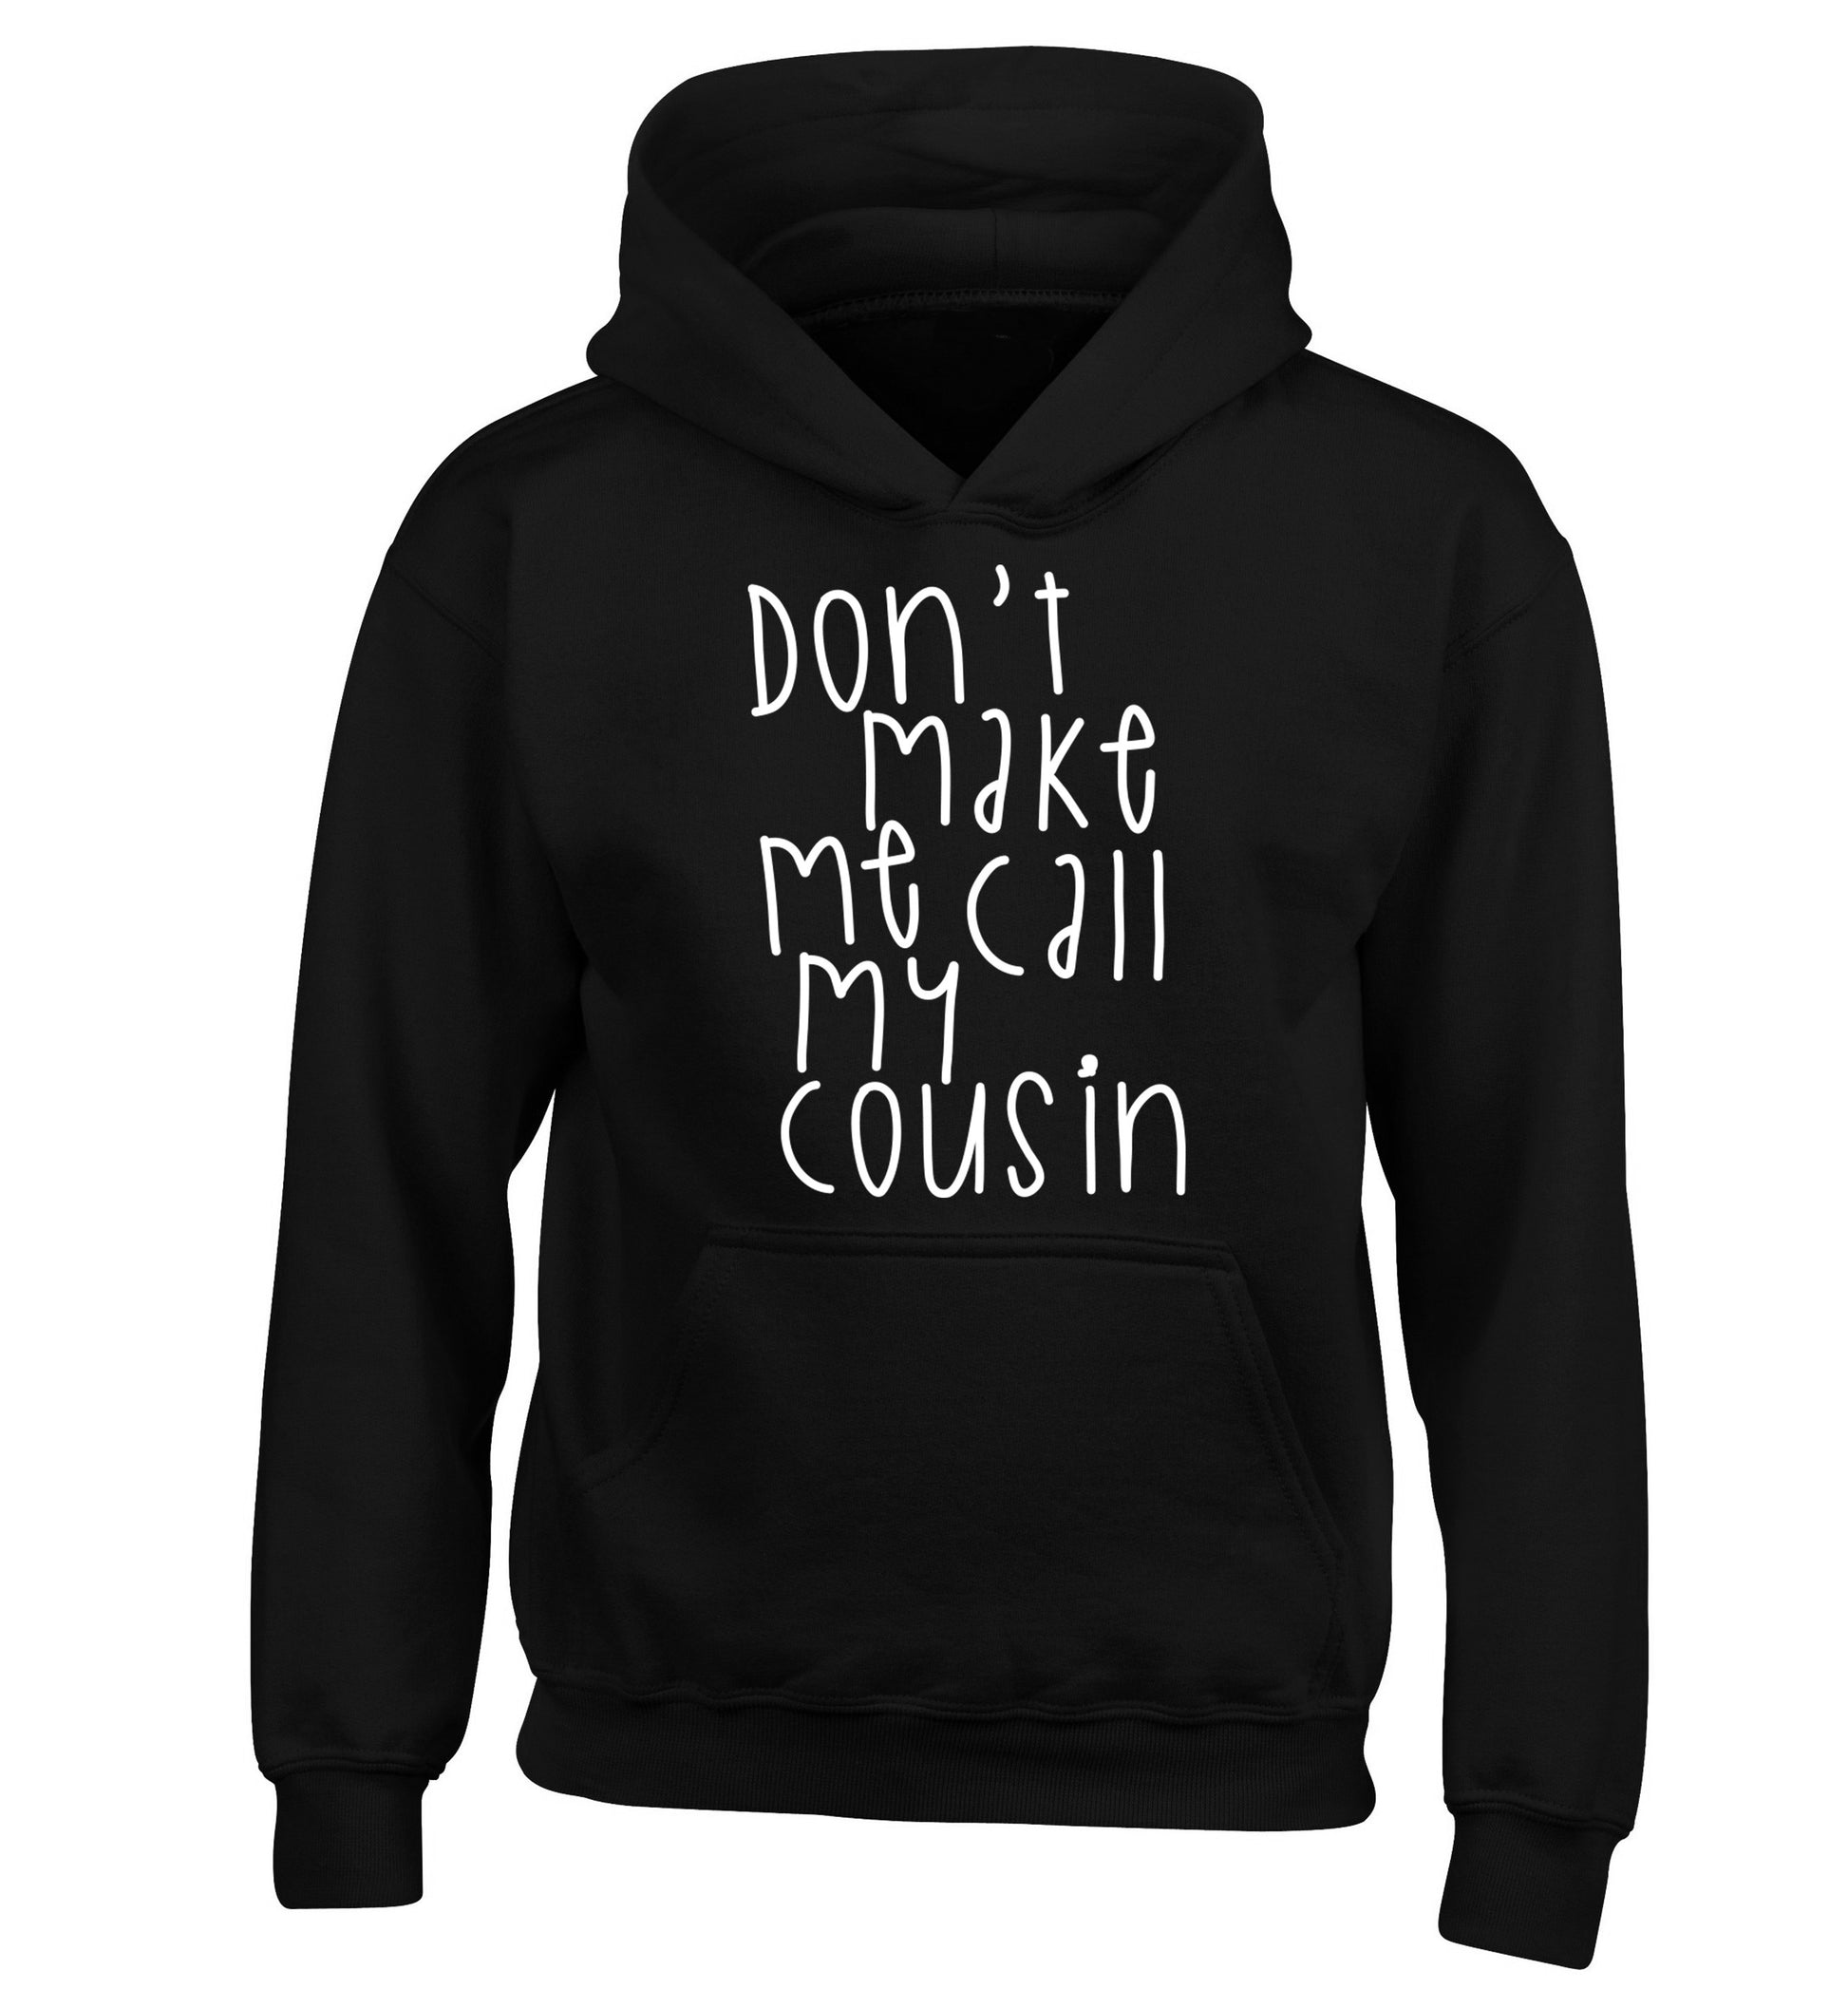 Don't make me call my cousin children's black hoodie 12-14 Years